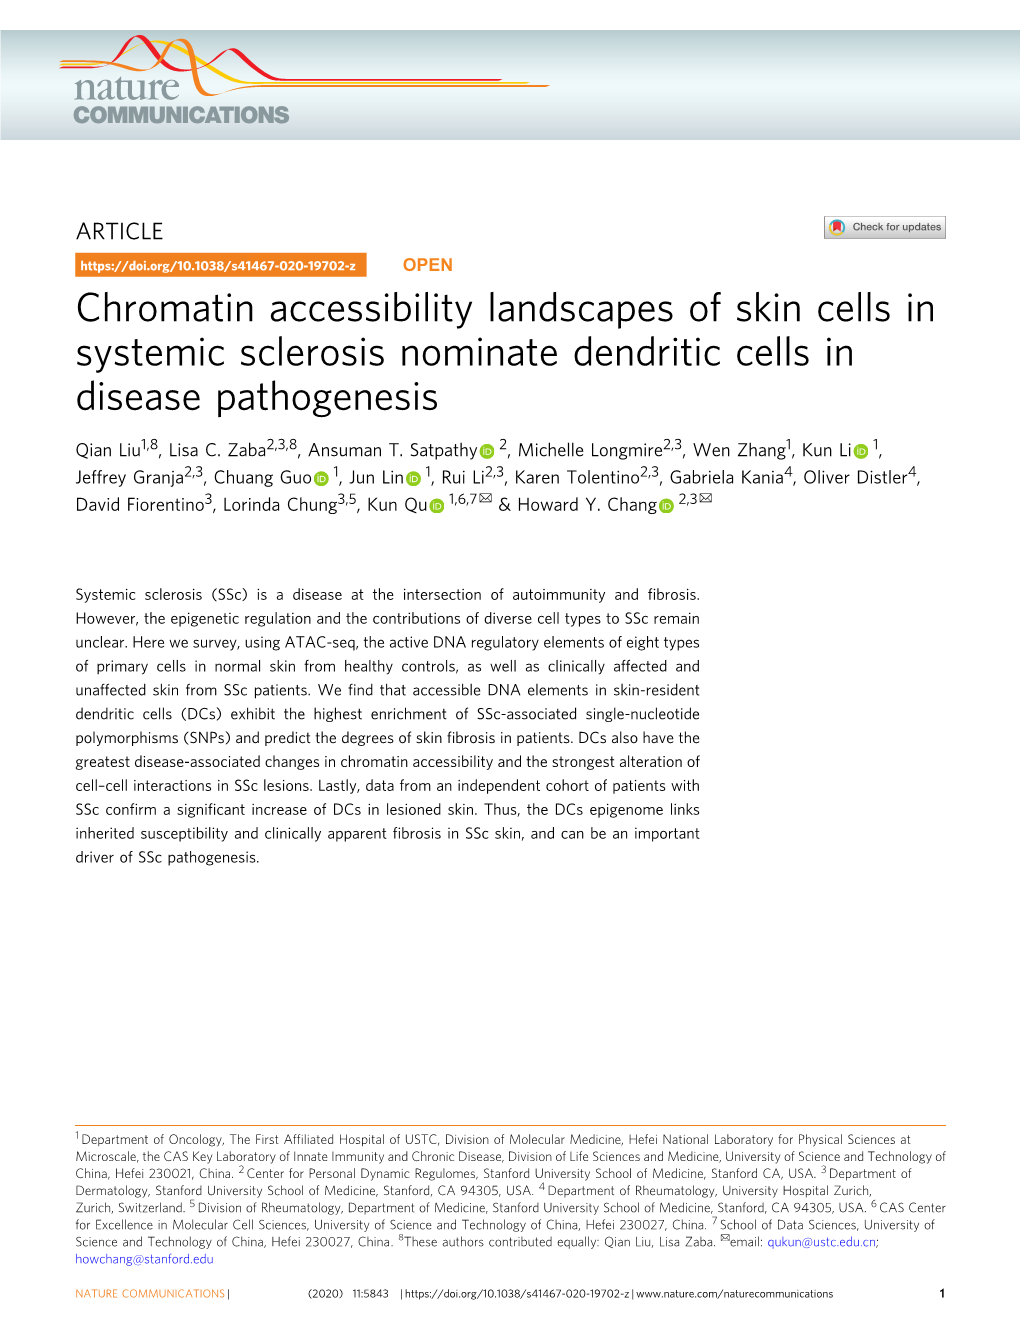 Chromatin Accessibility Landscapes of Skin Cells in Systemic Sclerosis Nominate Dendritic Cells in Disease Pathogenesis